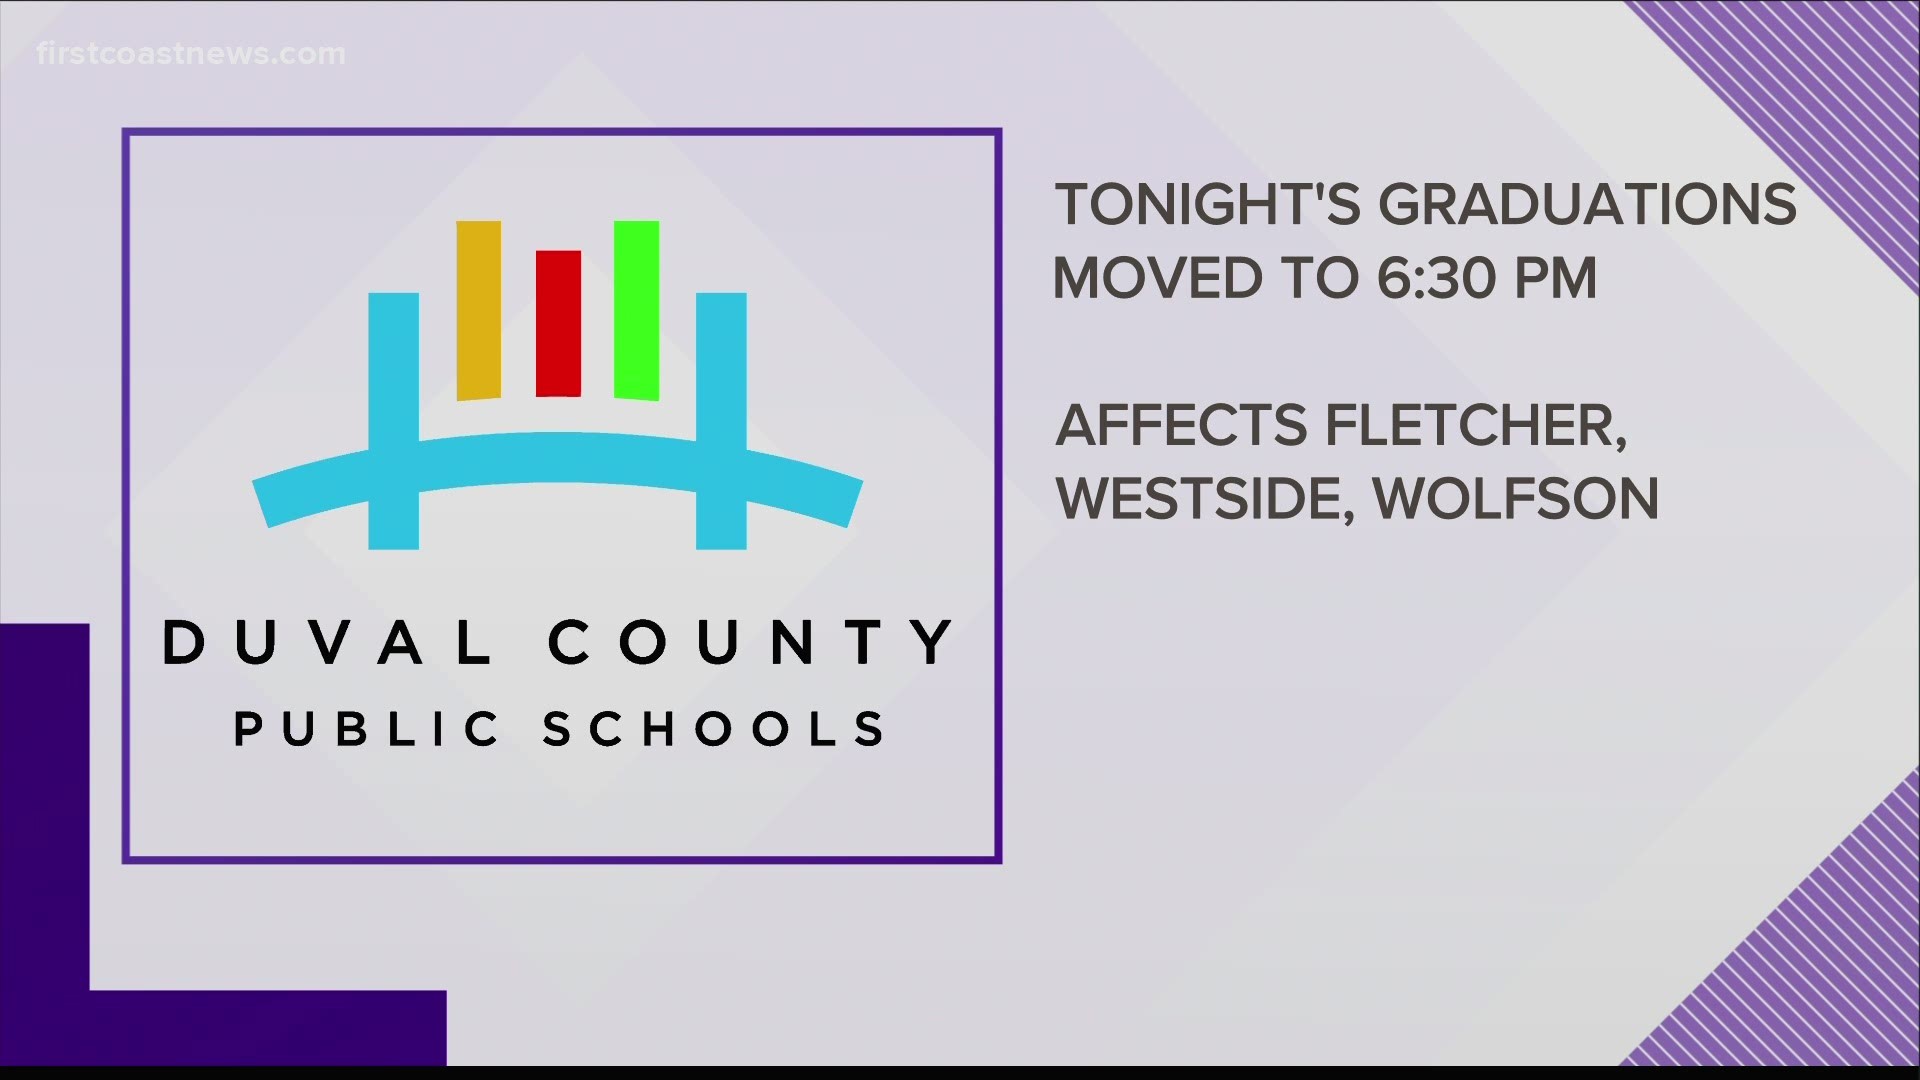 The graduations for Fletcher High School, Westside High School, and Wolfson High School were originally scheduled to begin at 6 p.m.